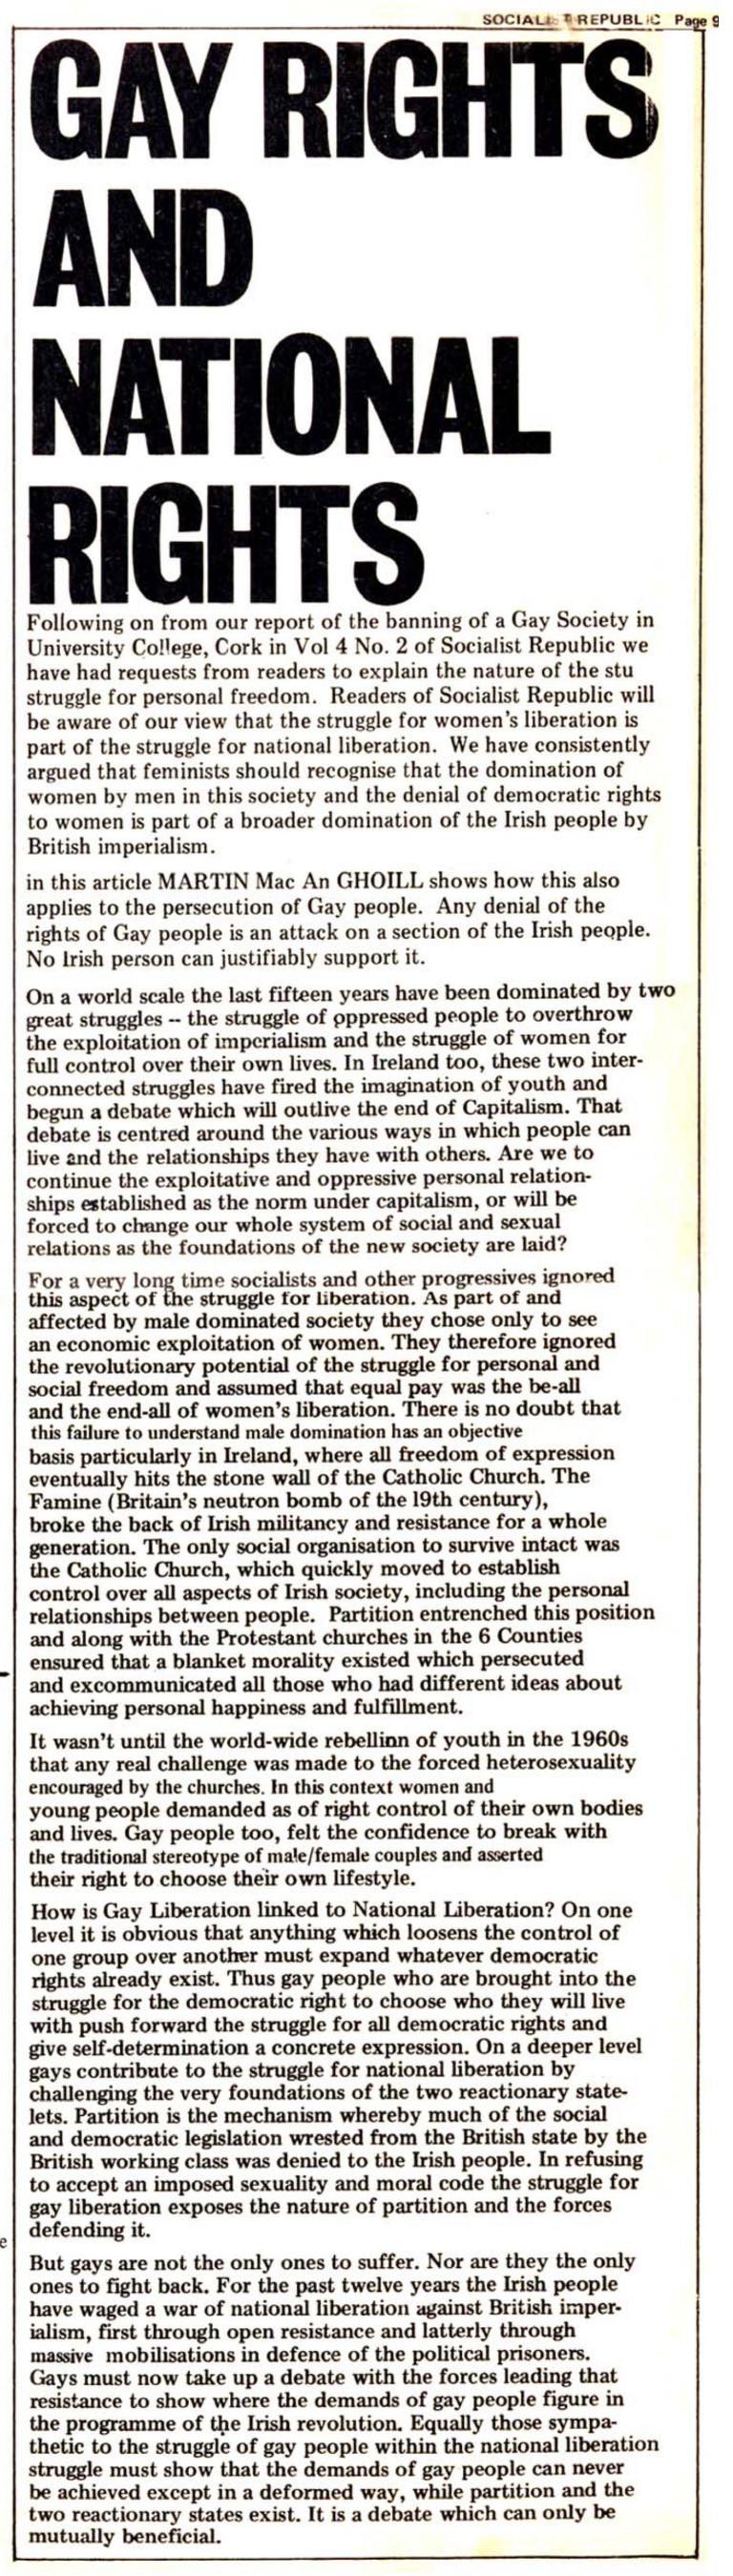 Gay Rights and National Rights

Following on from our report of the banning of a Gay Society in University College, Cork in Vol 4 No. 2 of Socialist Republic we have had requests from readers to explain the nature of the stu [sic] struggle for personal freedom. Readers of Socialist Republic will be aware of our view that the struggle for women’s liberation is part of the struggle for national liberation. We have consistently argued that feminists should recognise that the domination of women by men in this society and the denial of democratic rights to women is part of a broader domination of the Irish people by British imperialism.

[I]n this article MARTIN Mac An GHOILL shows how this also applies to the persecution of Gay people. Any denial of the rights of Gay people is an attack on a section of the Irish people. No Irish person can justifiably support it.

On a world scale the last fifteen years have been dominated by two great struggles — the struggle of oppressed people to overthrow the exploitation of imperialism and the struggle of women for full control over their own lives. In Ireland too, these two interconnected struggles have fired the imagination of youth and begun a debate which will outlive the end of Capitalism. That debate is centred around the various ways in which people can live 2nd the relationships they have with others. Are we to continue the exploitative and oppressive personal relationships established as the norm under capitalism, or will be forced to change our whole system of social and sexual relations as the foundations of the new society are laid?

For a very long time socialists and other progressives ignored this aspect of the struggle for liberation. As part of and affected by male dominated society they chose only to see bl an economic exploitation of women. They therefore ignored the revolutionary potential of the struggle for personal and social freedom and assumed that equal pay was the be-all i and the end-all of women’s liberation. There is no doubt that this failure to understand male domination has an objective basis particularly in Ireland, where all freedom of expression eventually hits the stone wall of the Catholic Church. The Famine (Britain’s neutron bomb of the 19th century), broke the back of Irish militancy and resistance for a whole generation. The only social organisation to survive intact was ® the Catholic Church, which quickly moved to establish control over all aspects of Irish society, including the personal relationships between people. Partition entrenched this position and along with the Protestant churches in the 6 Counties ensured that a blanket morality existed which persecuted and excommunicated all those who had different ideas about achieving personal happiness and fulfillment.

It wasn’t until the world-wide rebellion of youth in the 1960s that any real challenge was made to the forced heterosexuality encouraged by the churches. In this context women and young people demanded as of right control of their own bodies and lives. Gay people too, felt the confidence to break with the traditional stereotype of male/female couples and asserted their right to choose their own lifestyle.

How is Gay Liberation linked to National Liberation? On one level it is obvious that anything which loosens the control of one group over another must expand whatever democratic rights already exist. Thus gay people who are brought into the struggle for the democratic right to choose who they will live with push forward the struggle for all democratic rights and give self-determination a concrete expression. On a deeper level gays contribute to the struggle for national liberation by challenging the very foundations of the two reactionary statelets. Partition is the mechanism whereby much of the social and democratic legislation wrested from the British state by the British working class was denied to the Irish people. In refusing to accept an imposed sexuality and moral code the struggle for gay liberation exposes the nature of partition and the forces defending it.

But gays are not the only ones to suffer. Nor are they the only ones to fight back. For the past twelve years the Irish people have waged a war of national liberation against British imperialism, first through open resistance and latterly through massive mobilisations in defence of the political prisoners. Gays must now take up a debate with the forces leading that resistance to show where the demands of gay people figure in the programme of the Irish revolution. Equally those sympathetic to the struggle of gay people within the national liberation struggle must show that the demands of gay people can never be achieved except in a deformed way, while partition and the  two reactionary states exist. It is a debate which can only be mutually beneficial.